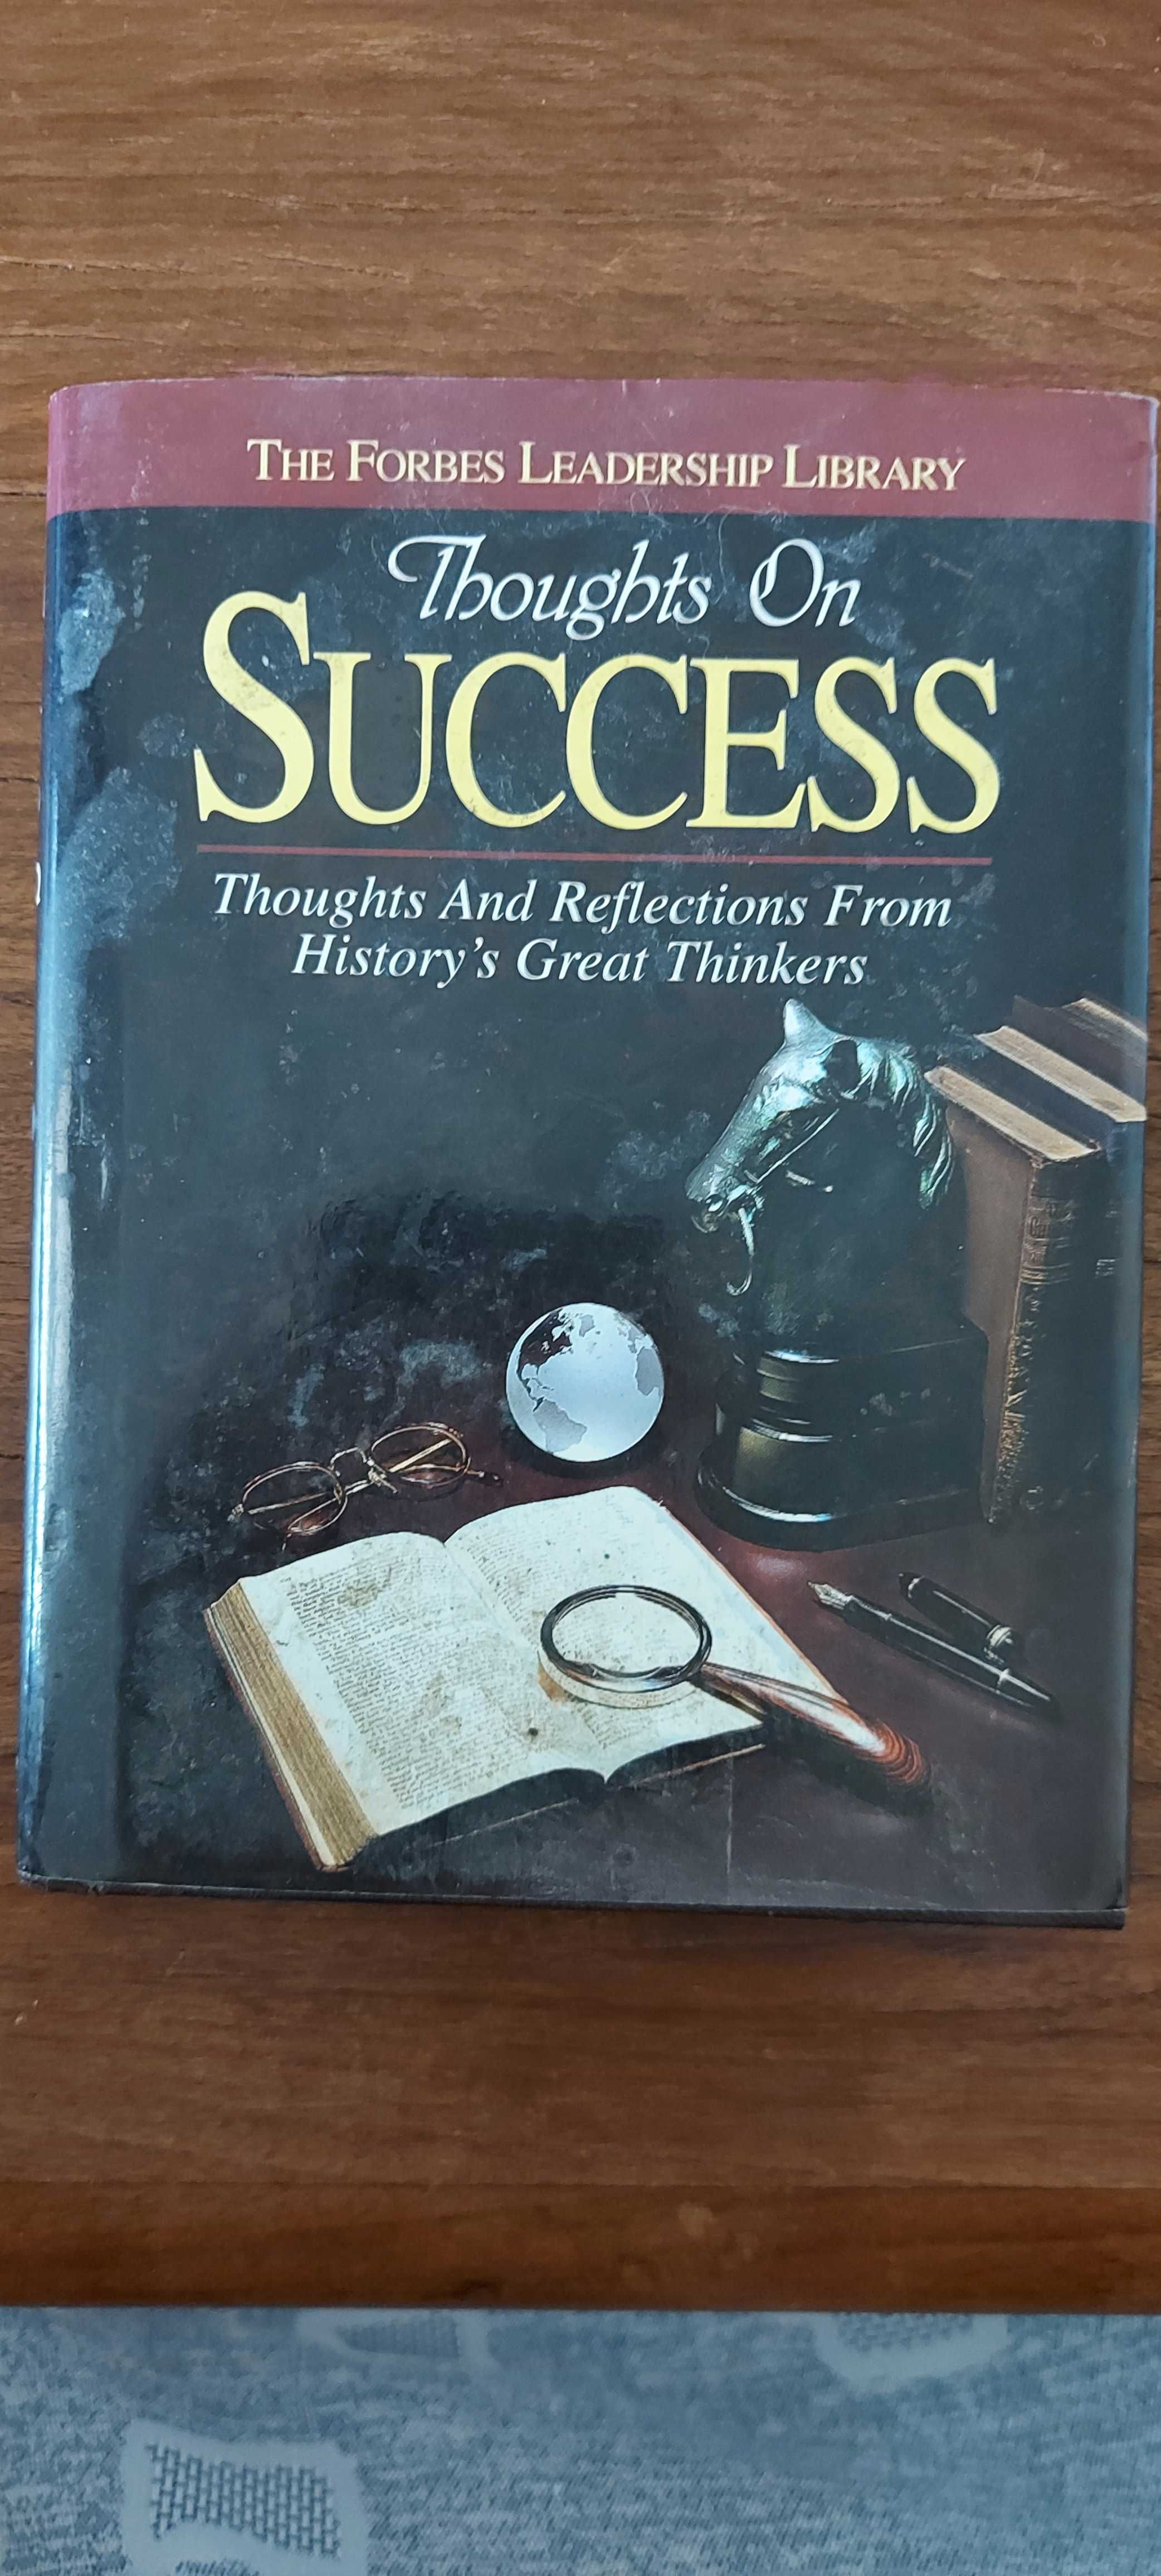 Livro - Thoughts on Success